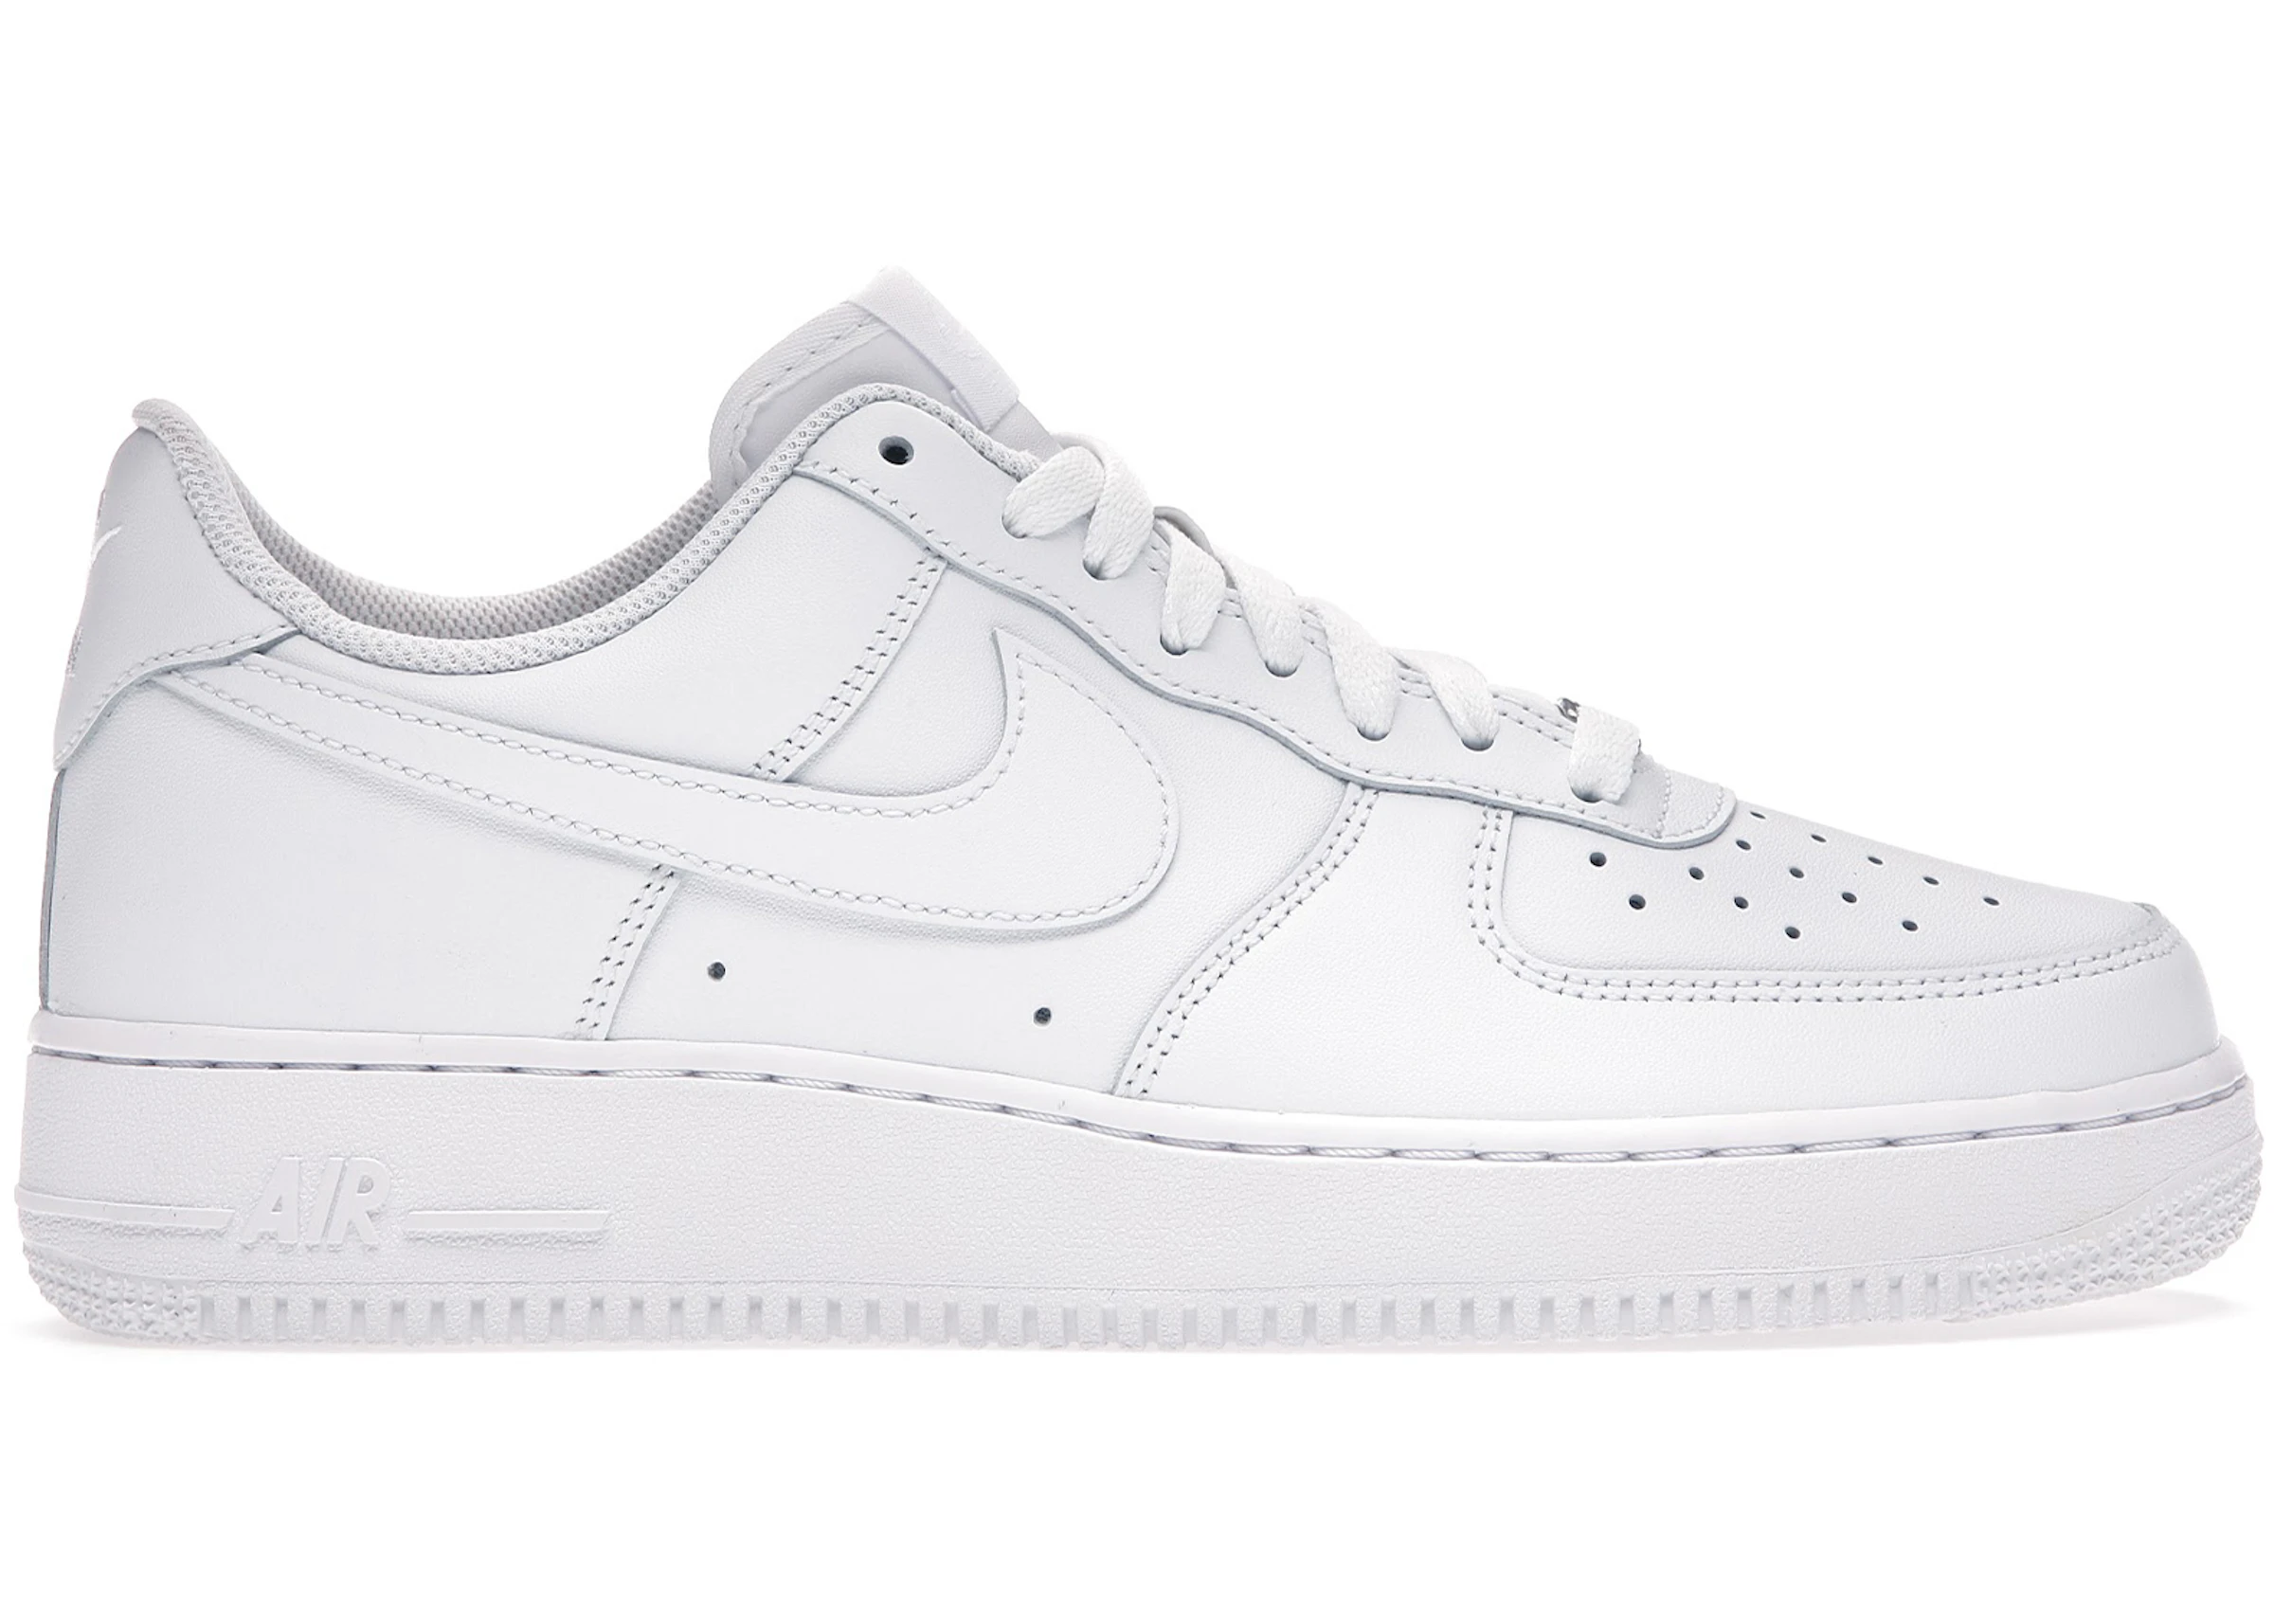 Expanding Cruelty Remarkable Buy Nike Air Force 1 - Low White